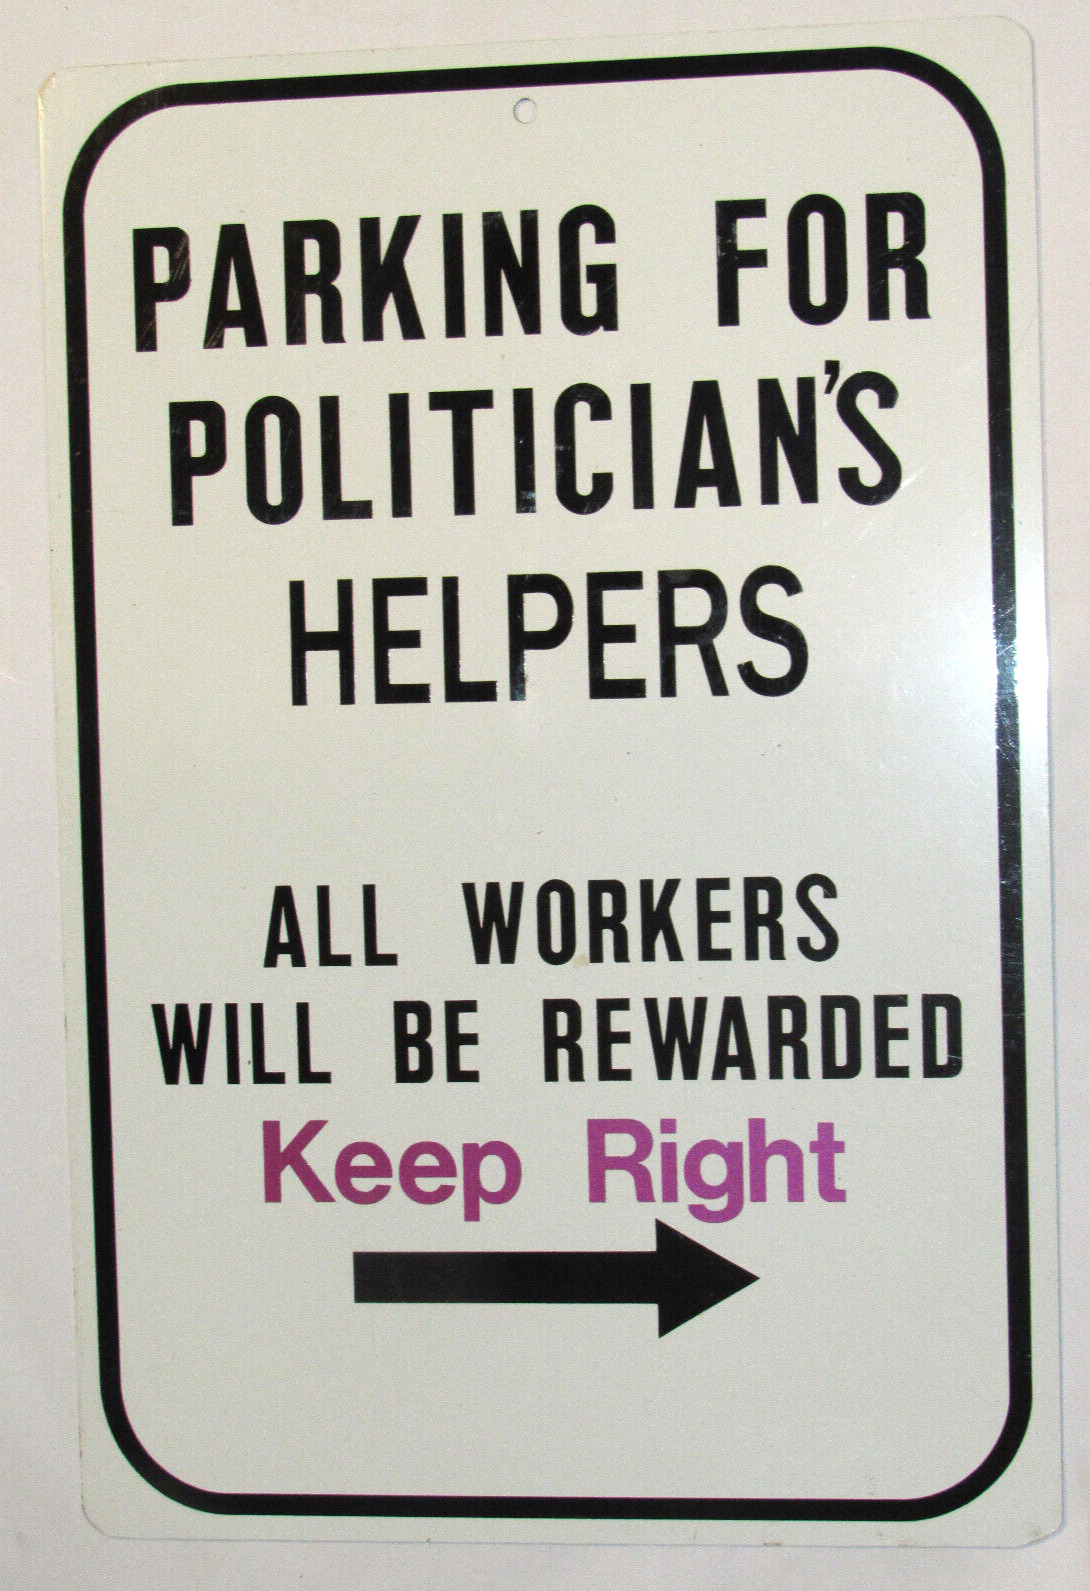 1990s 'PARKING FOR POLITICIAN'S HELPERS' METAL SIGN 12x18